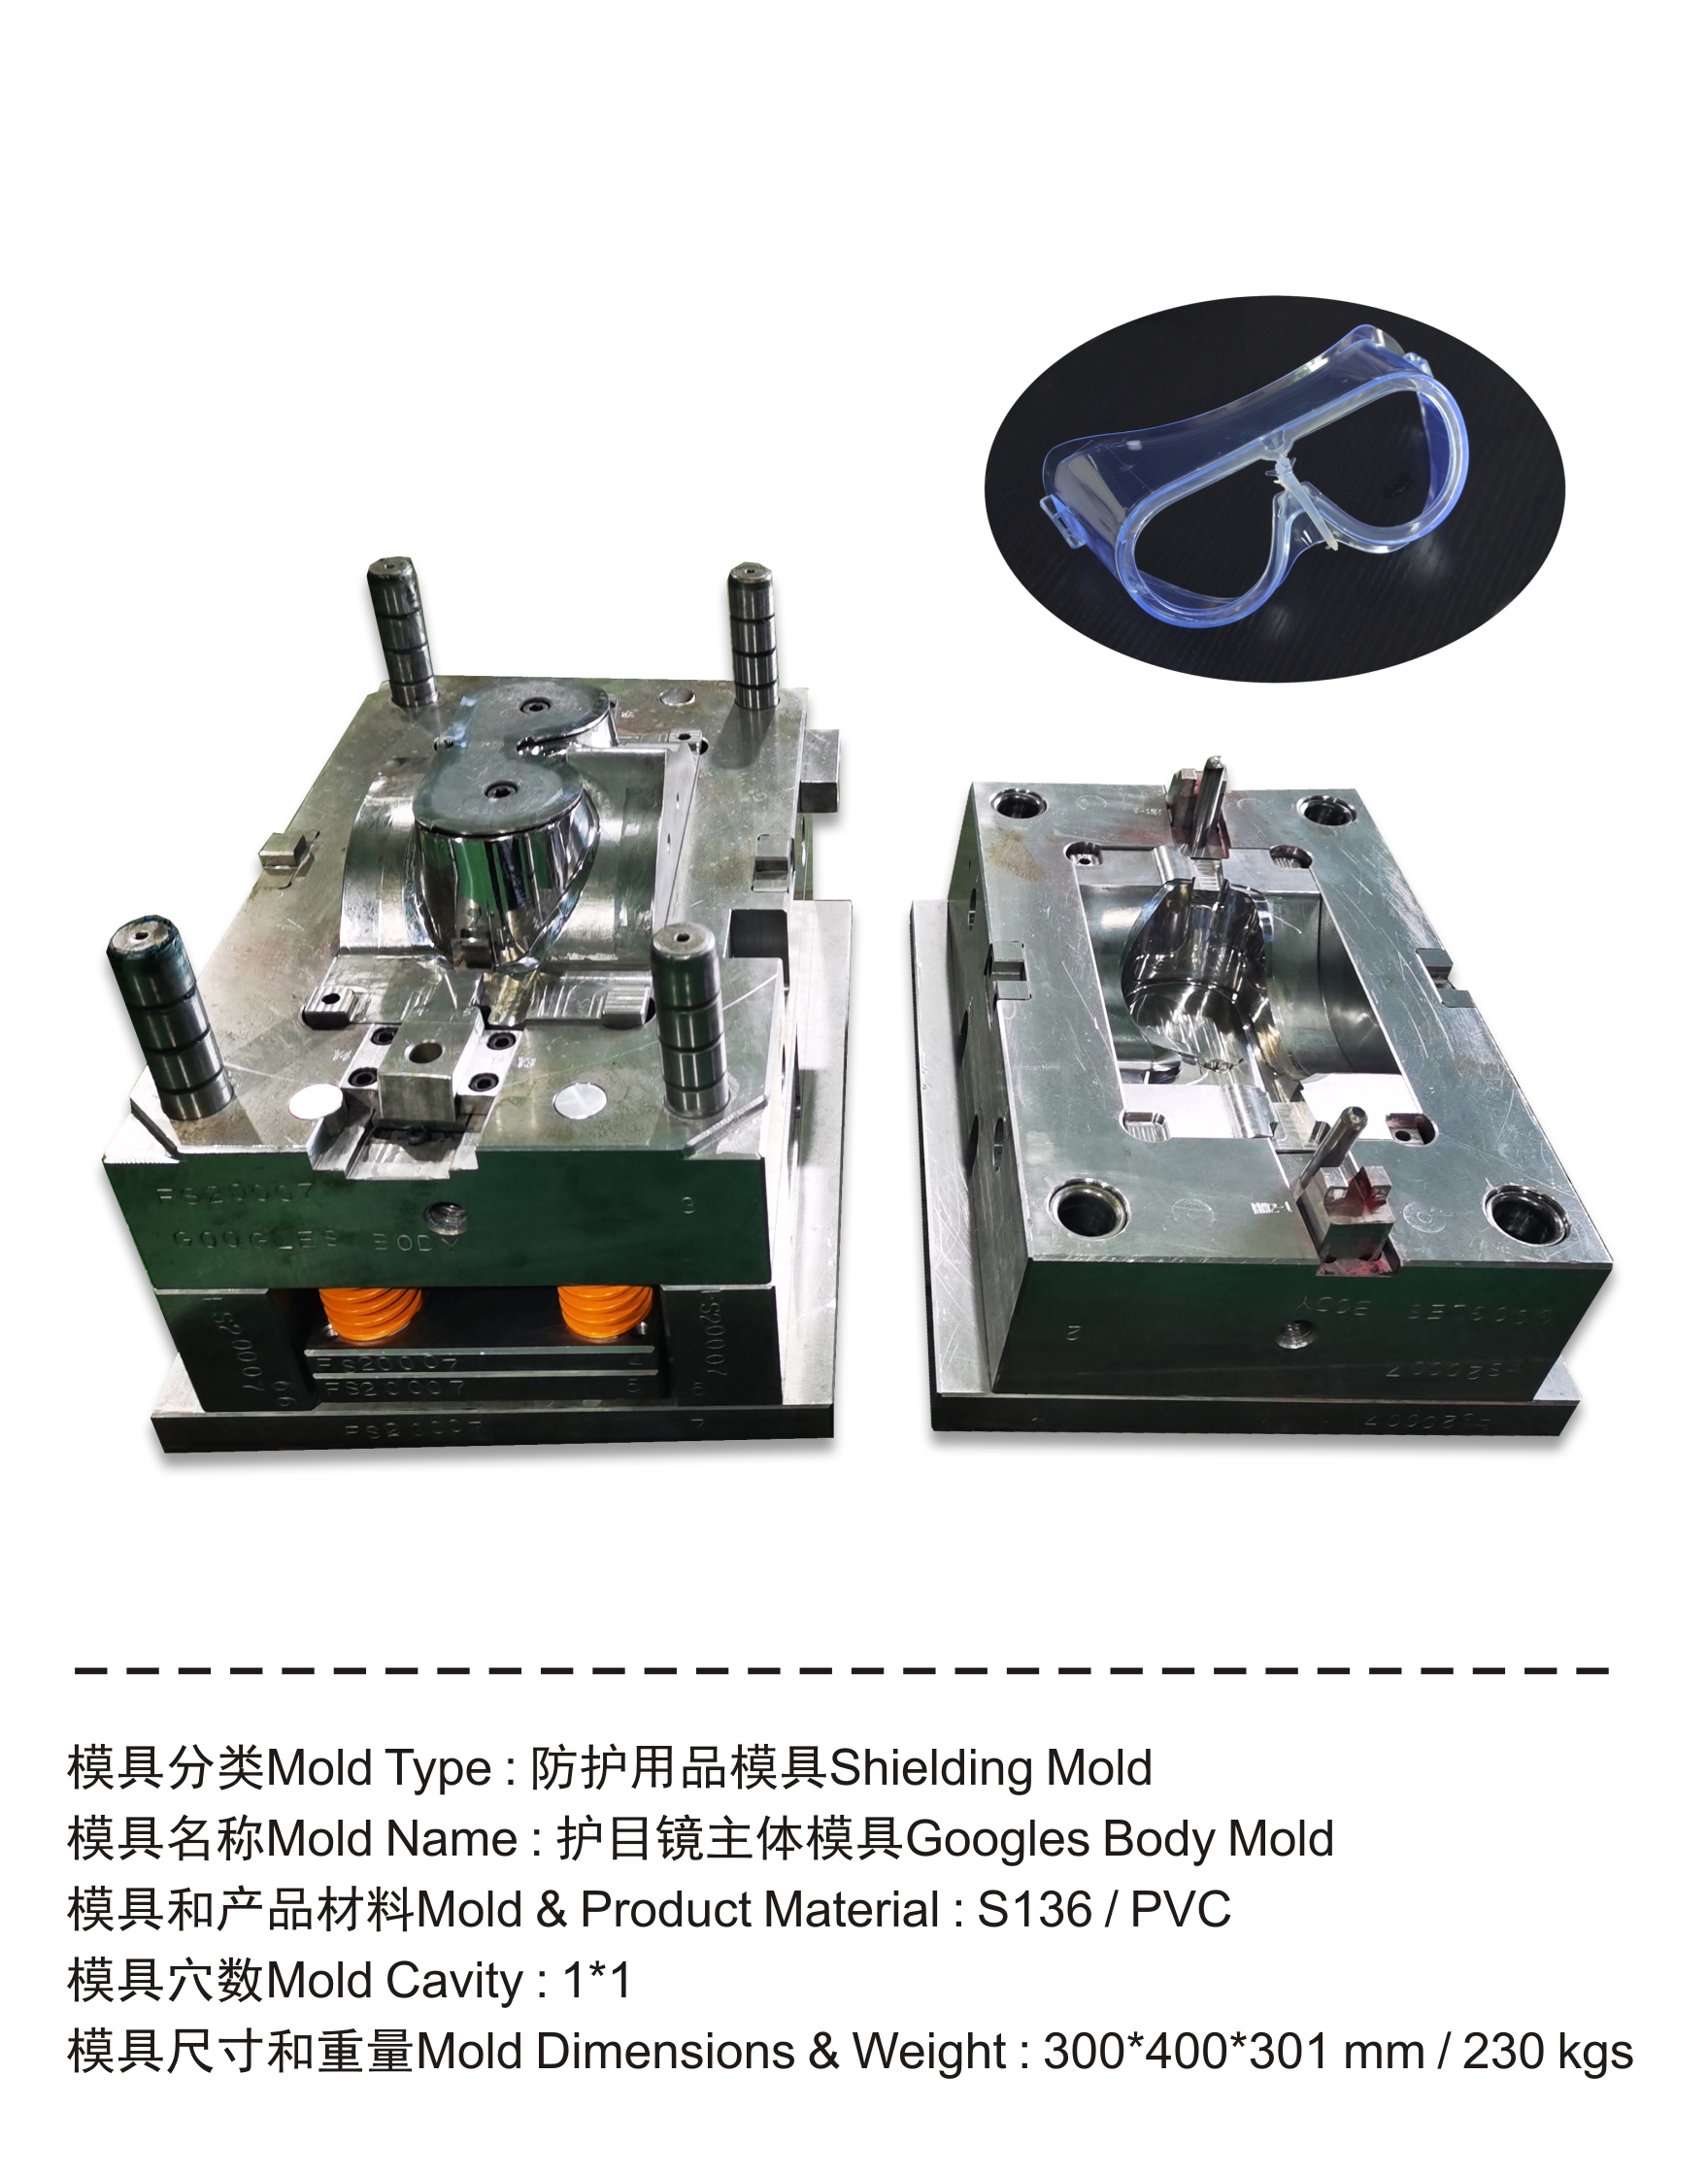 ABS plastic plastic shell goggle lens mold injection molding PC transparent goggles plastic mold making 